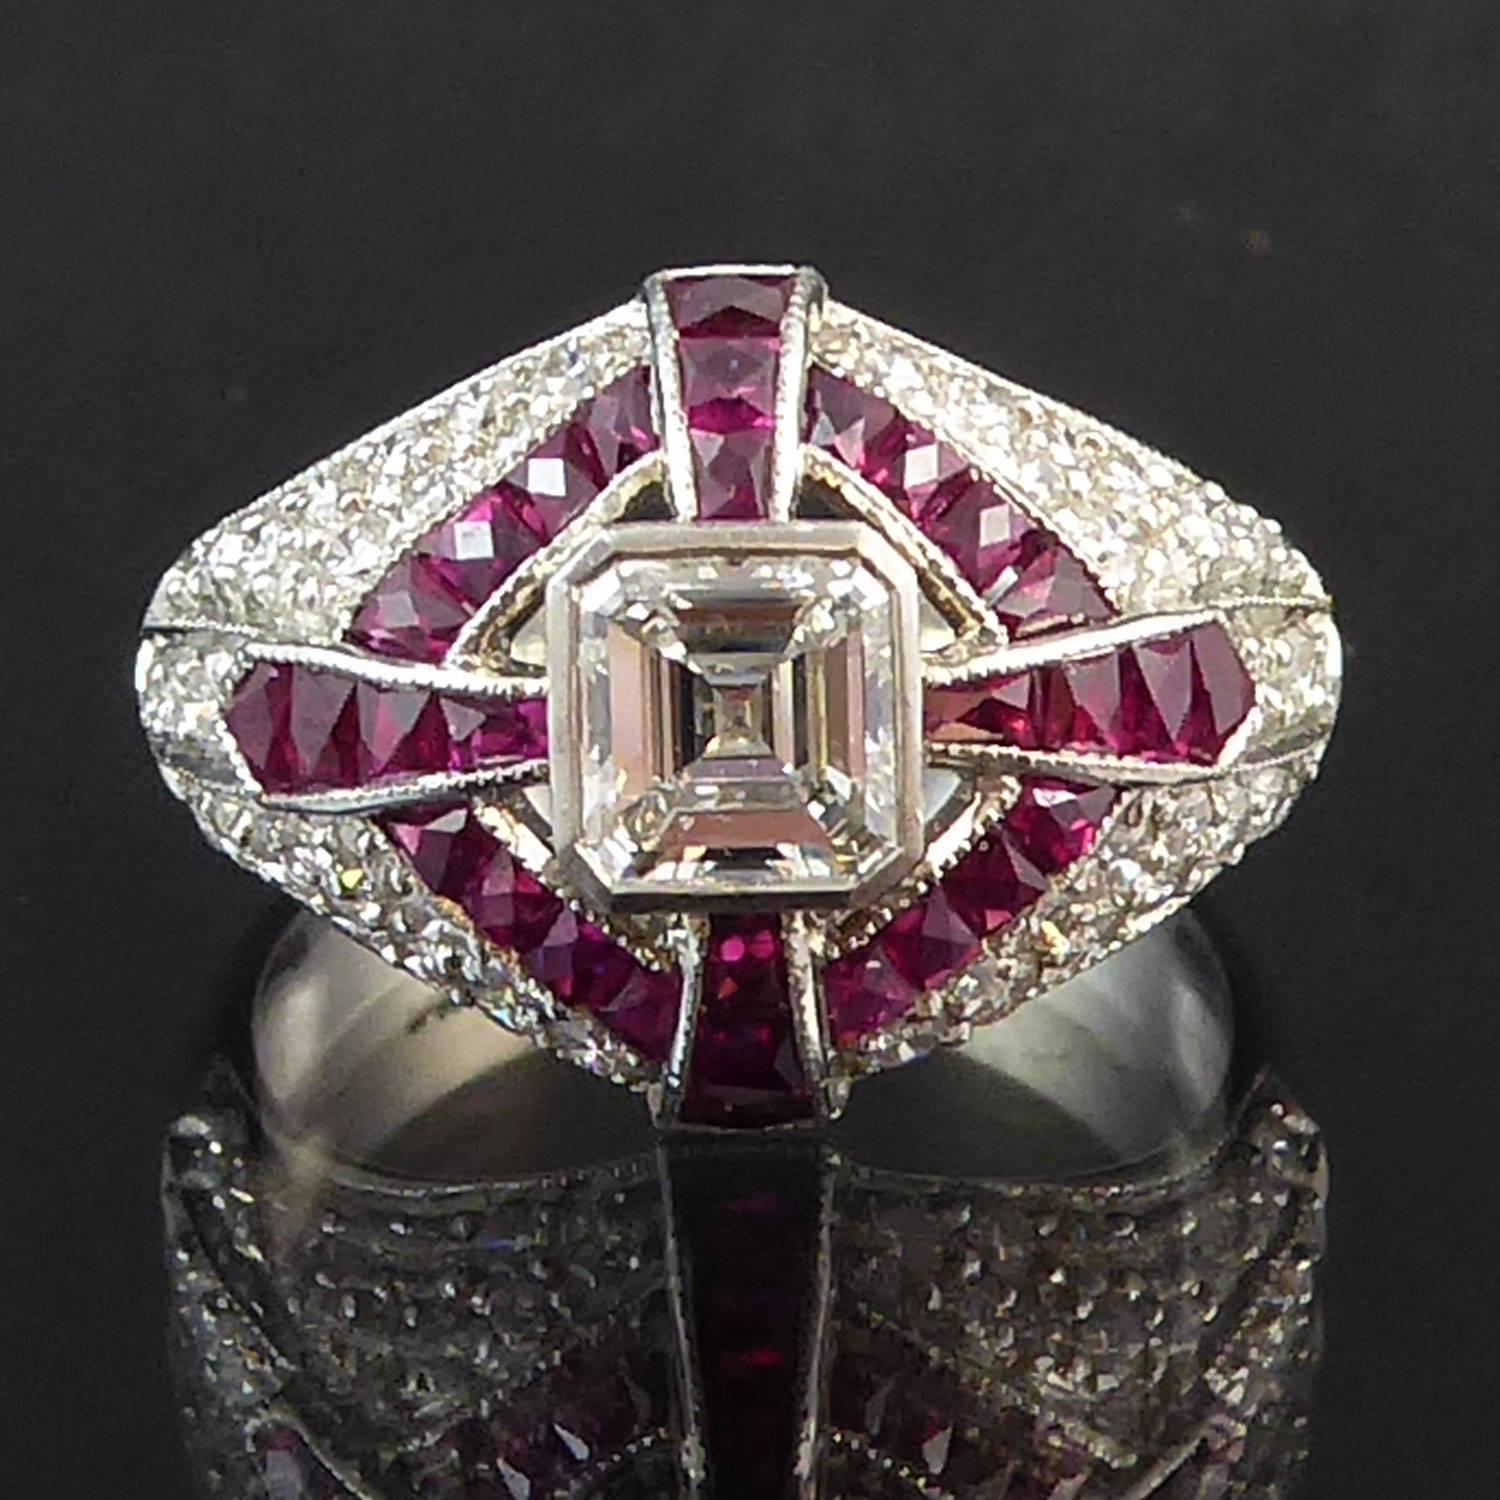 Modern Art Deco Style Diamond and Ruby Cocktail Ring, circa 1930s 9